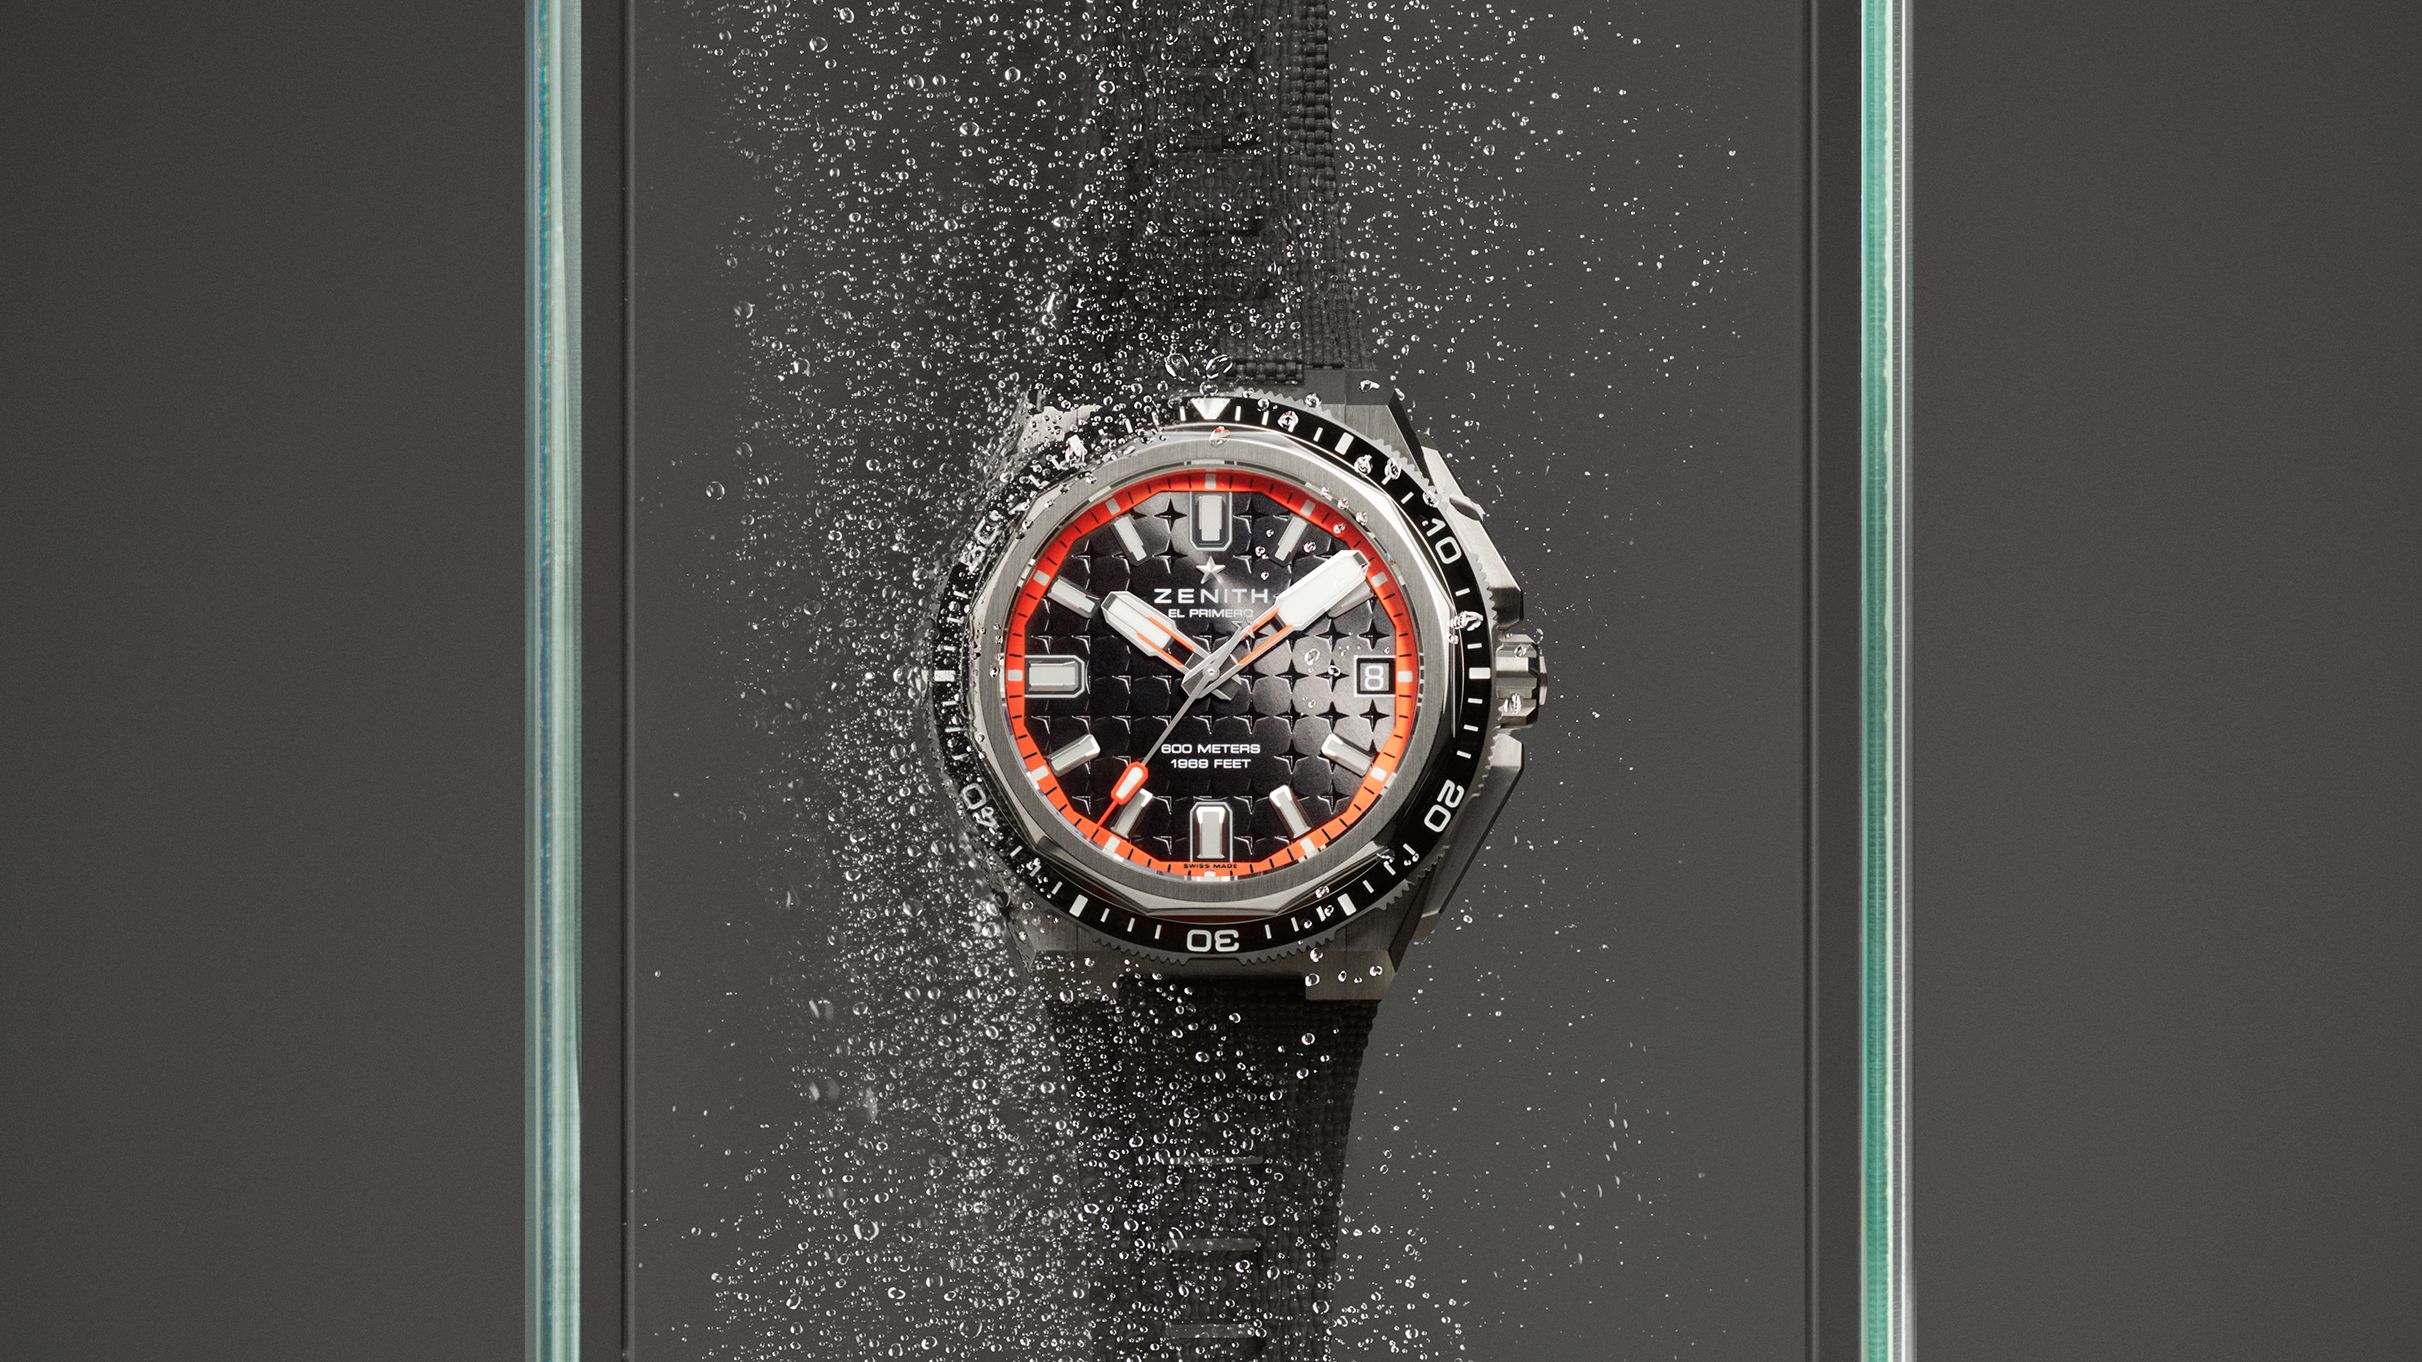 The Zenith Defy Extreme offers 600 meters of water resistance